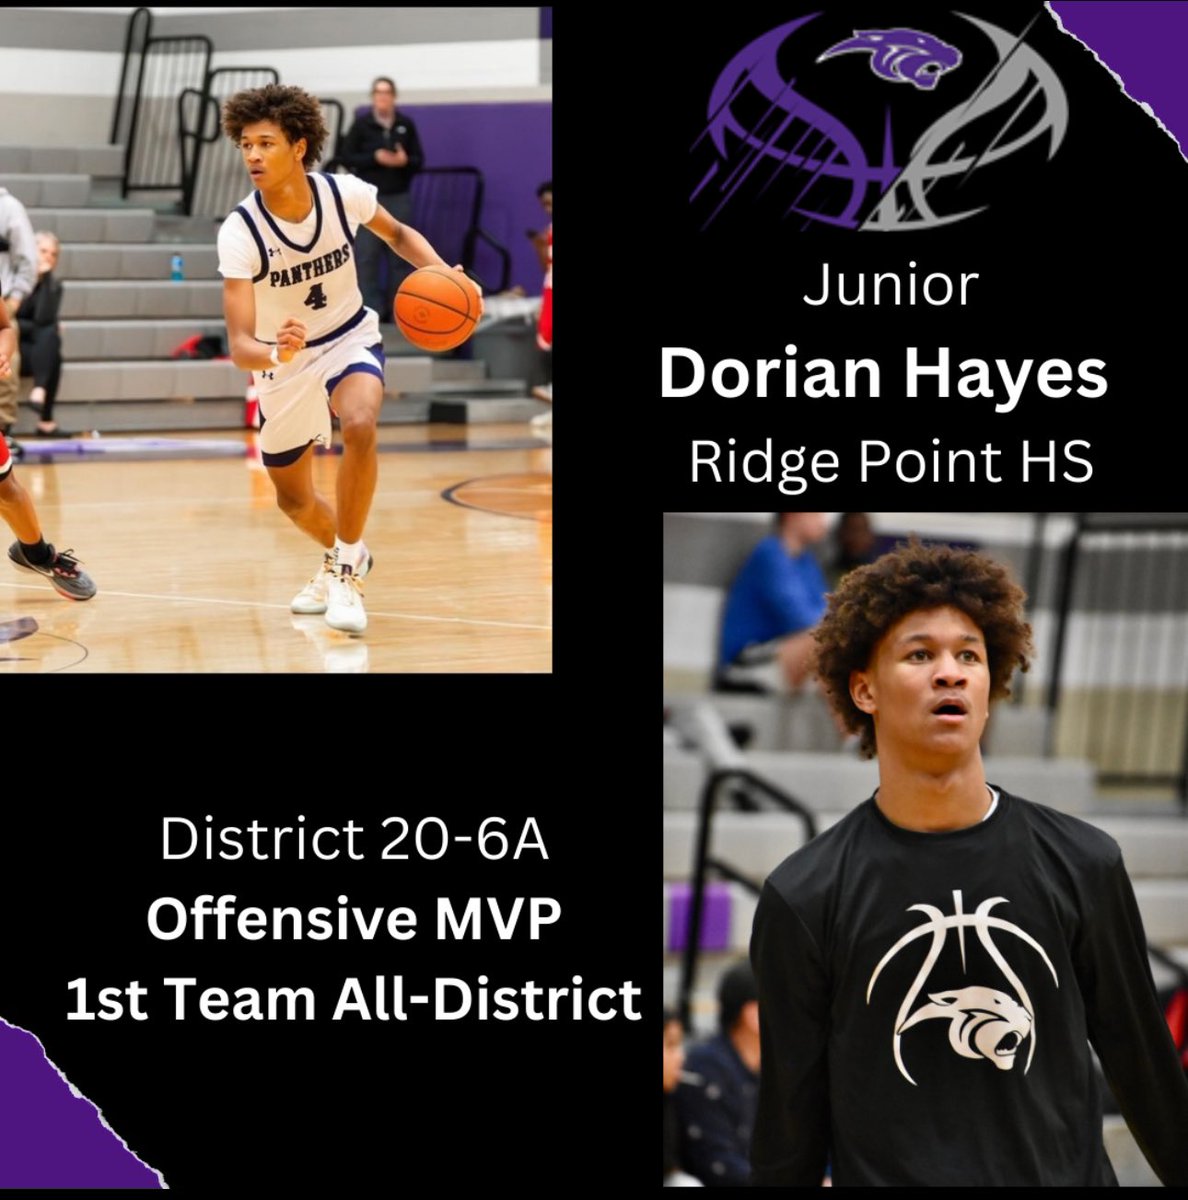 Congratulations @dorianhayes_ on being named district Offensive MVP. Great honor for an amazing kid. #Brotherhood #C>S #TGW